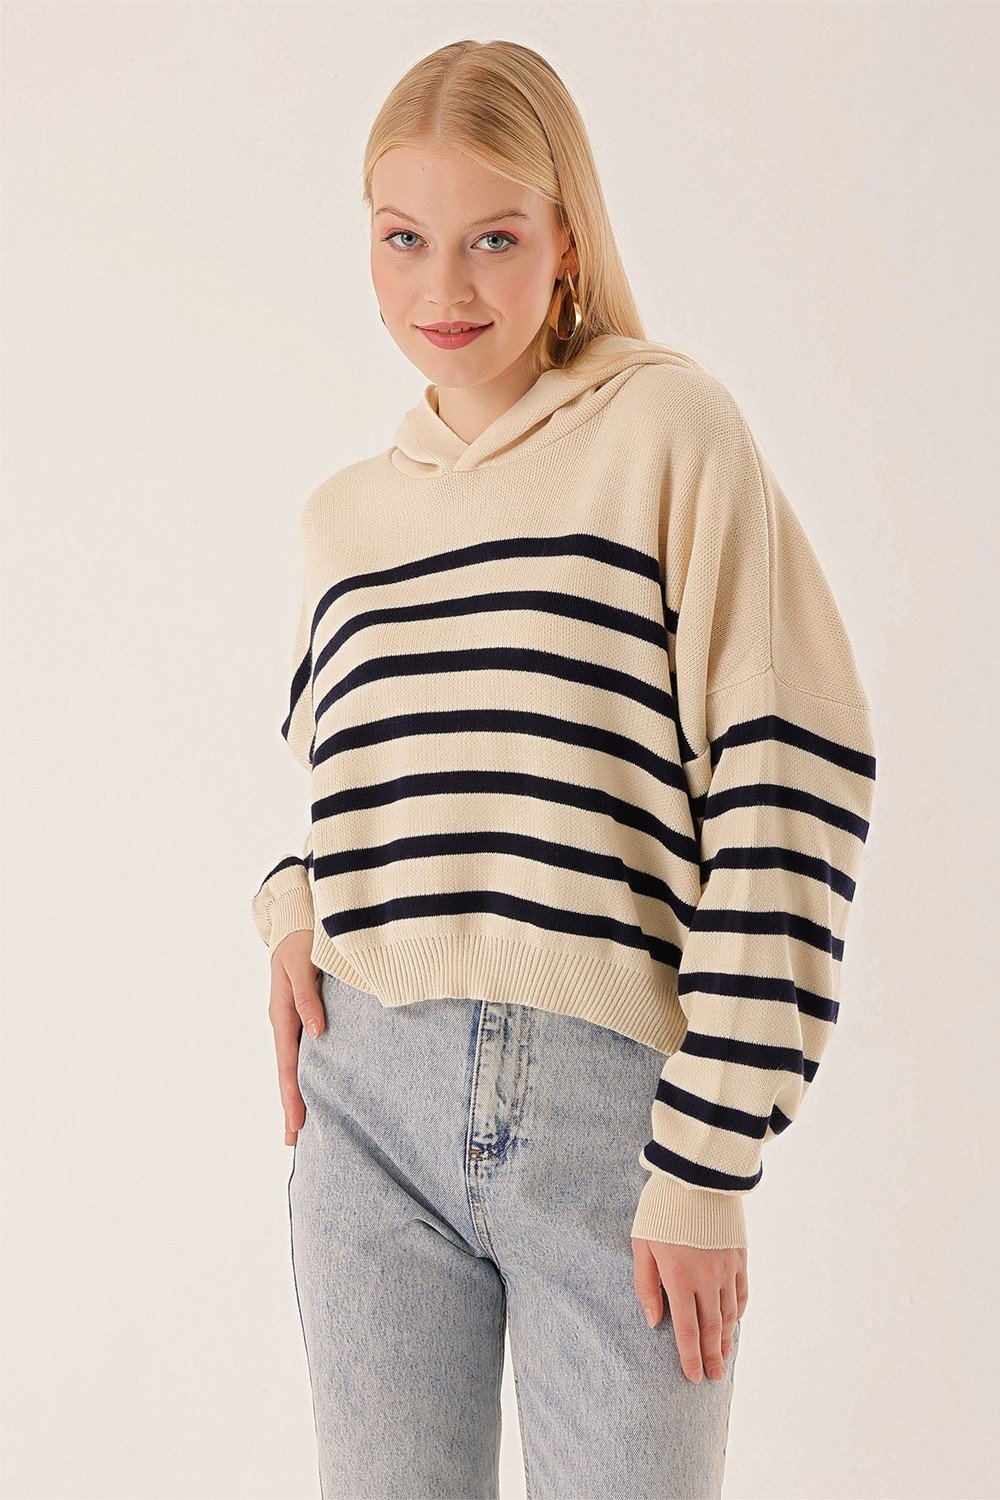 HAKKE Striped knit sweater with a hoodie.